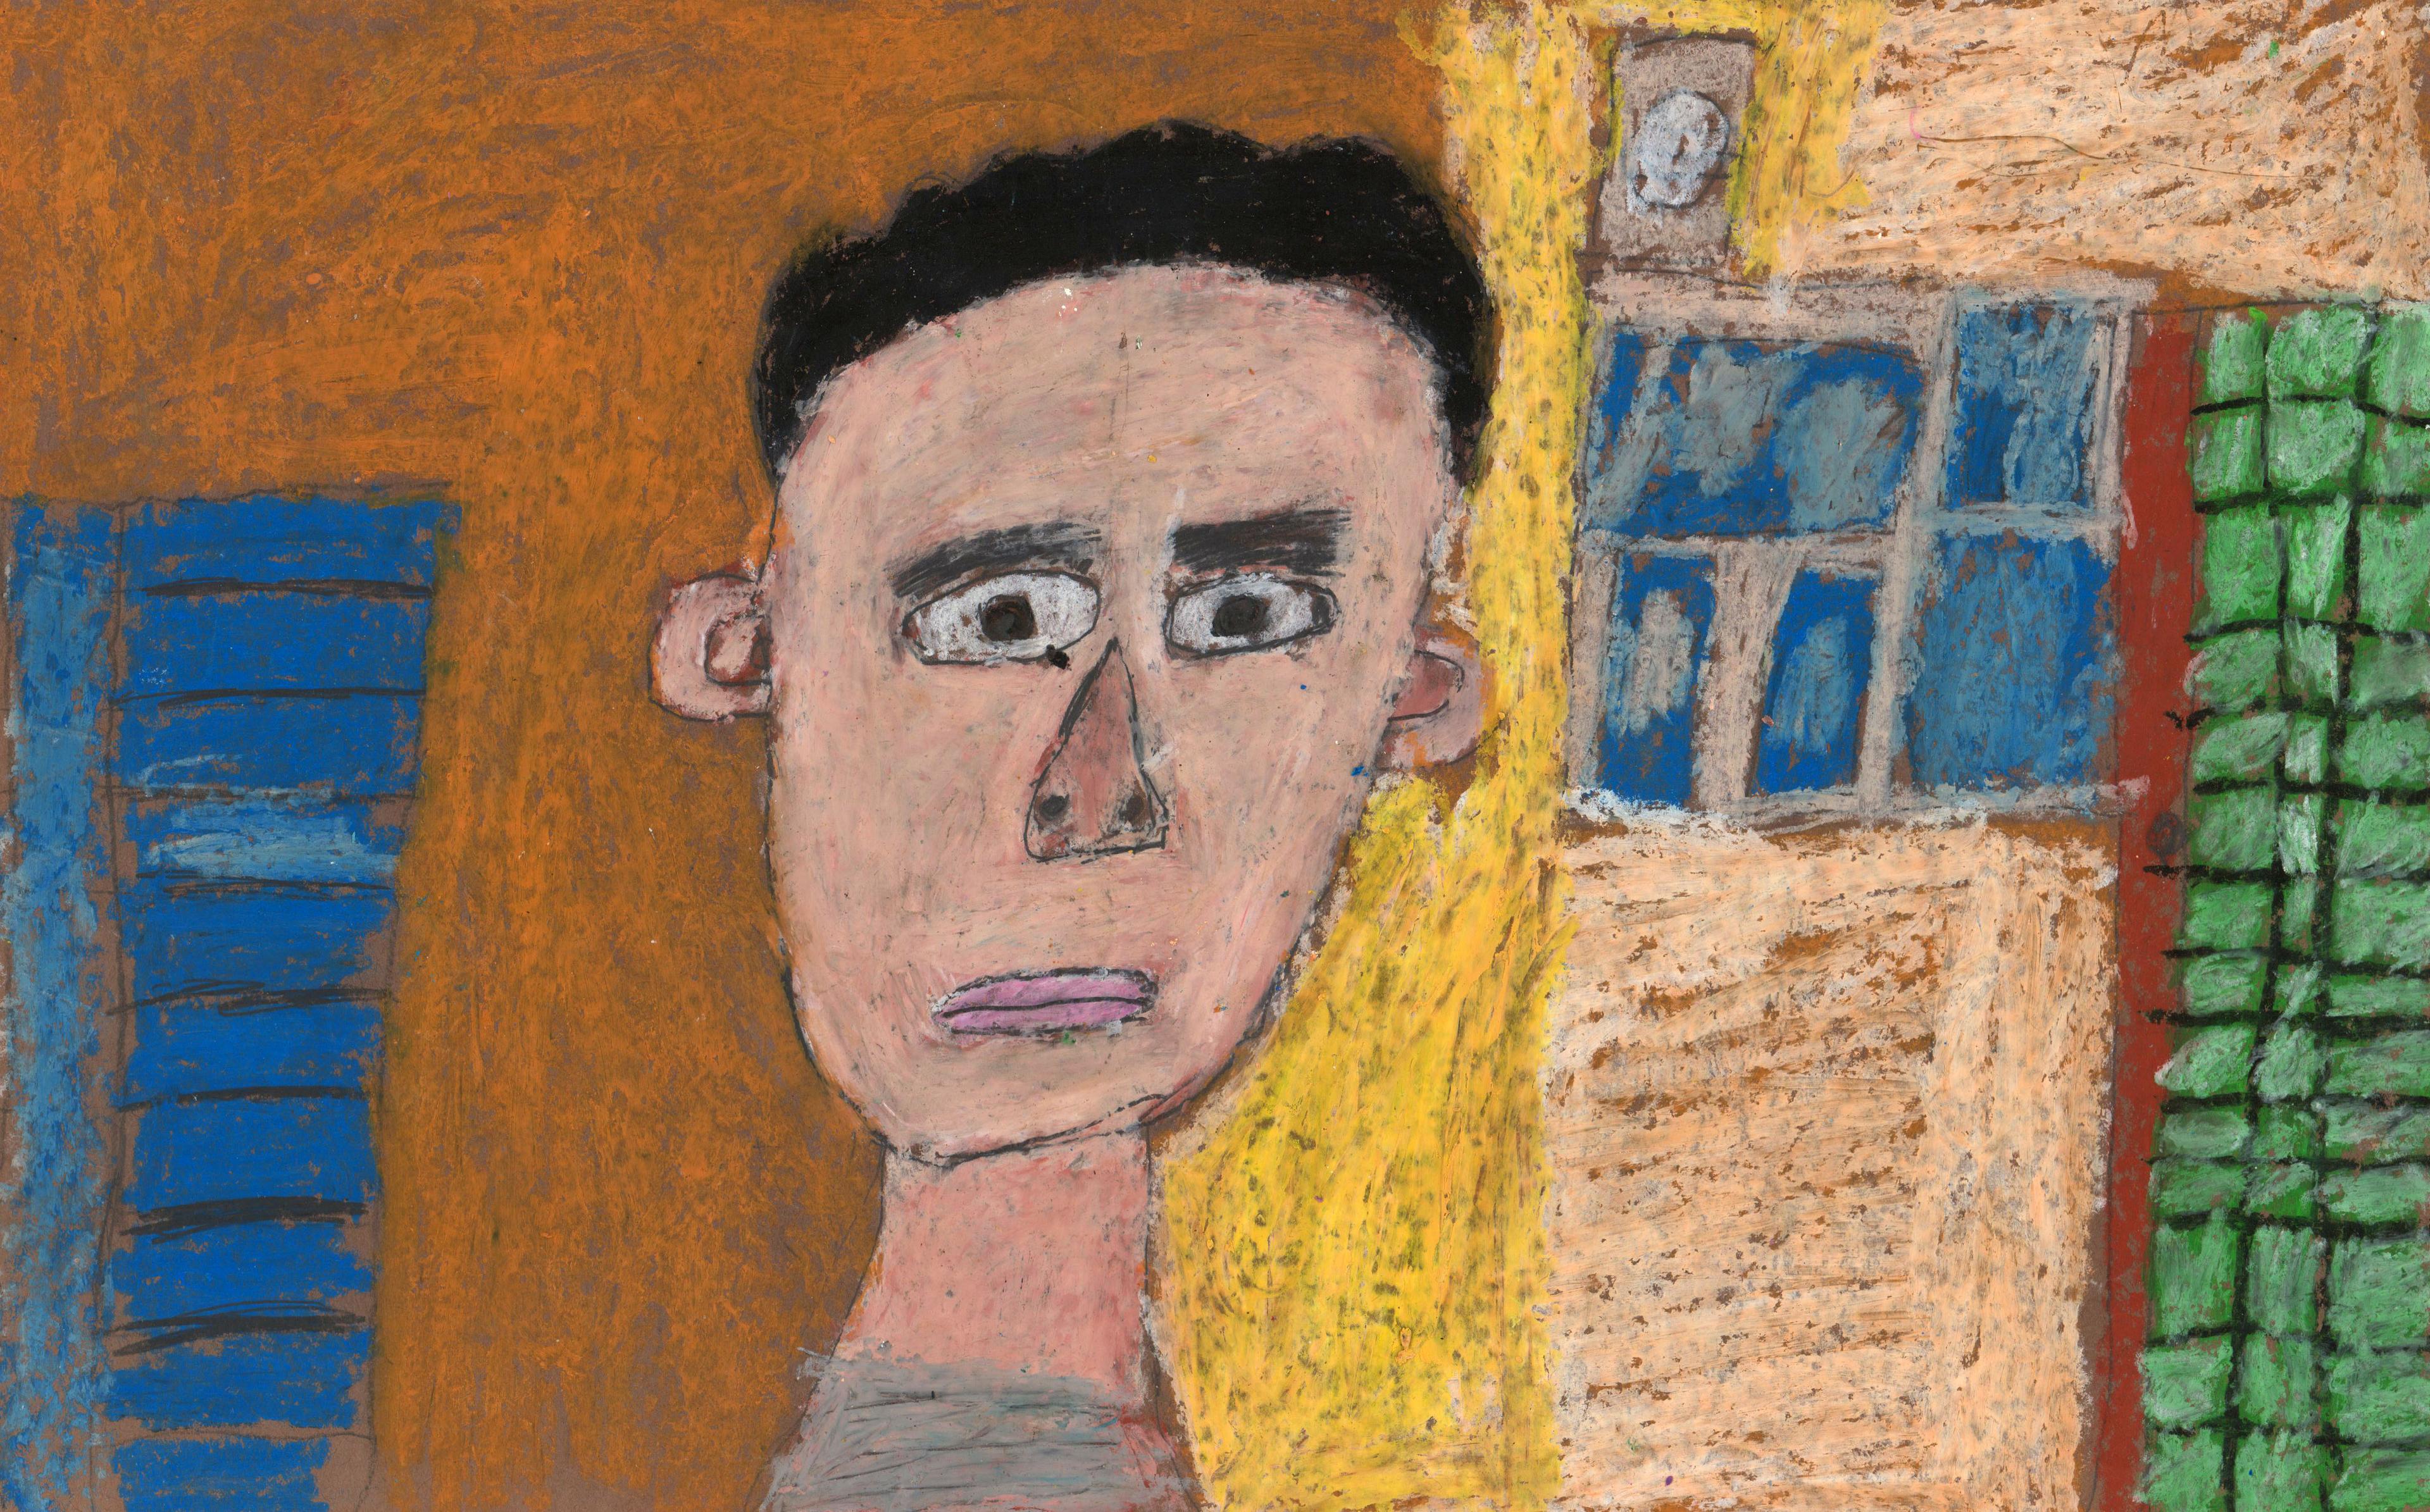 Pencil-and–oil pastel self-portrait of a young light-skinned boy. He appears in front of a brown wall and a blue door with black horizontal lines to the left, and a yellow wall to his right, followed by a beige wall with a blue framed window near the top, and a green door to the far right covered in a pattern of square black lines. The boy faces the viewer and has short black hair. A gray shirt is shown partially below his neck. He has thick black eyebrows, dark eyes, and a neutral expression on his face.